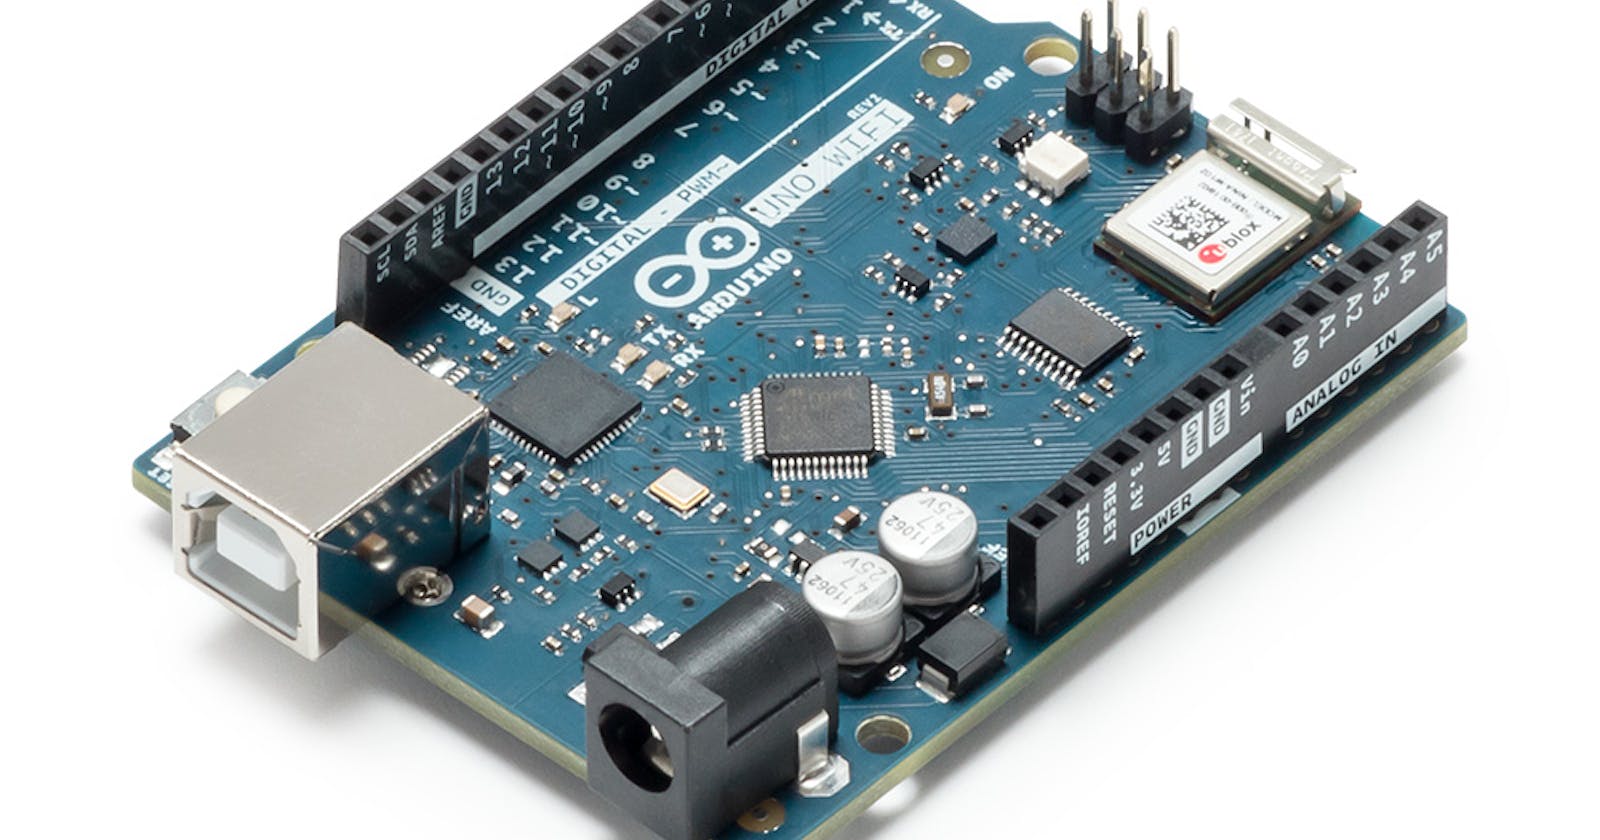 Troubleshooting and Overcoming Challenges with Chinese Arduino CH340 Boards